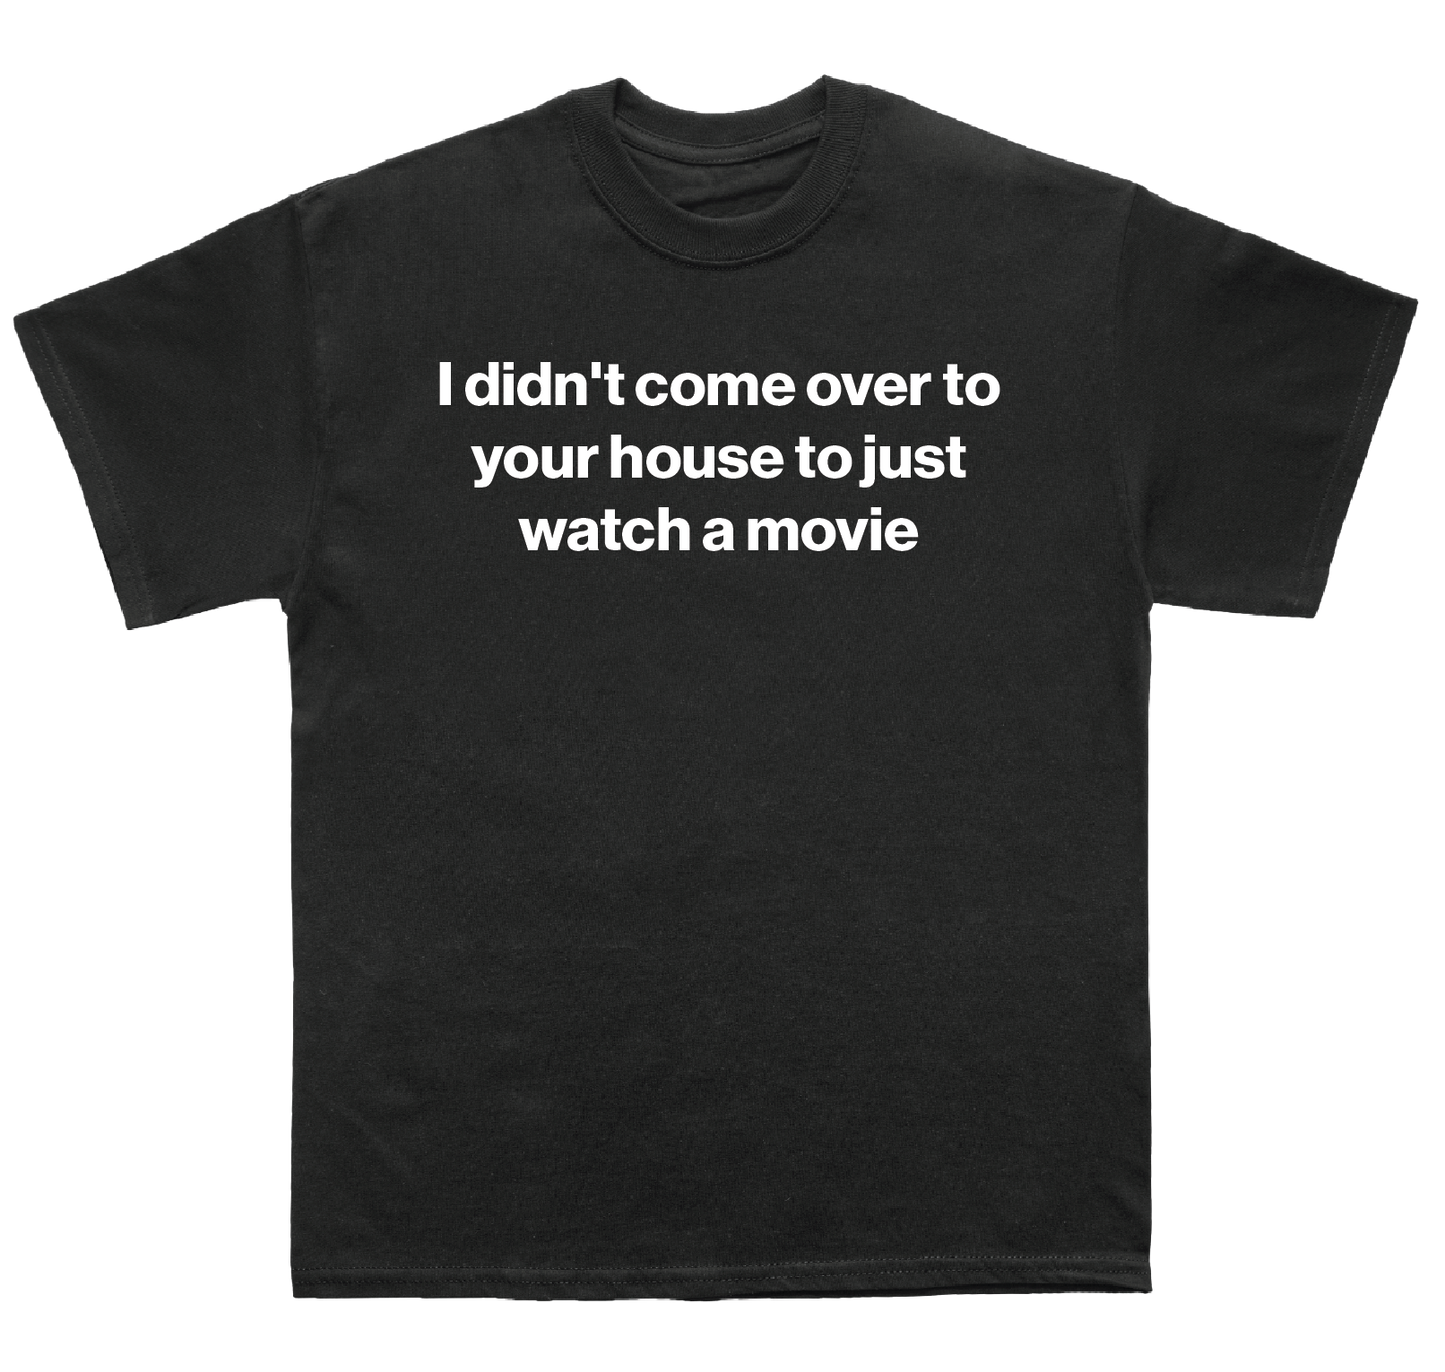 I didn't come over to your house to just watch a movie shirt